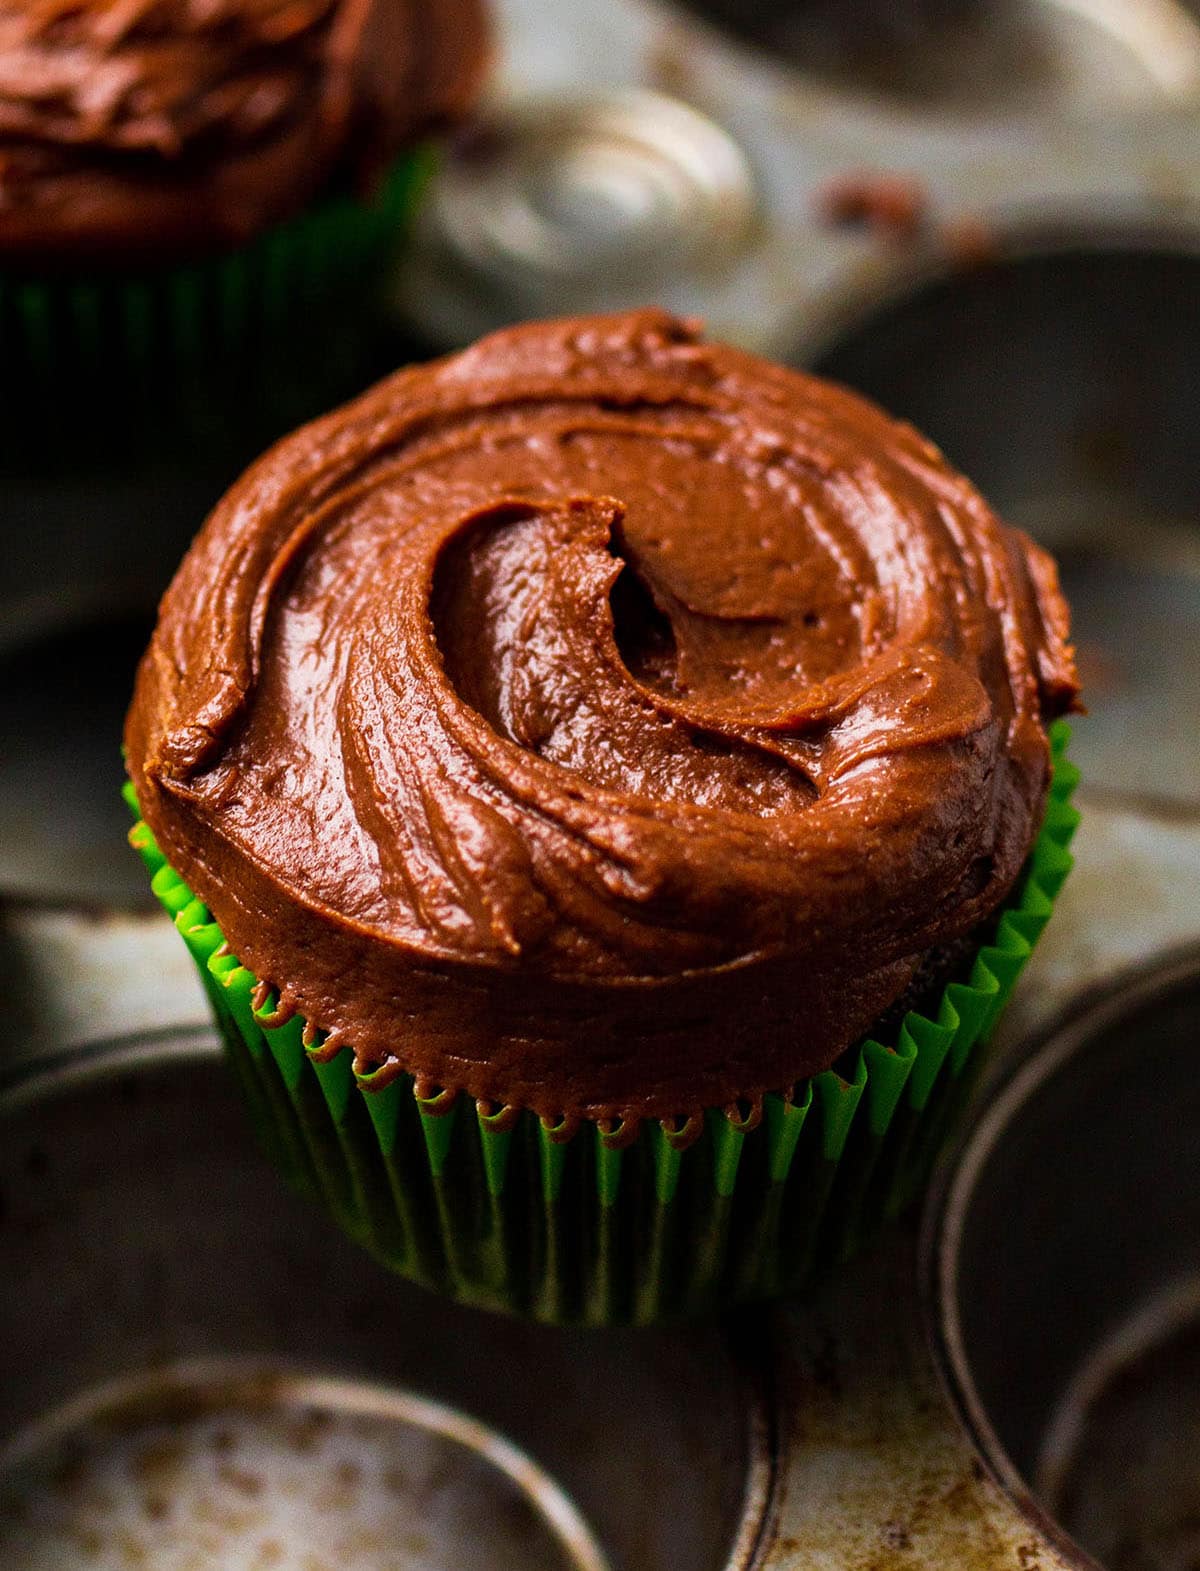 Chocolate cupcake in a green wrapper on top of a metal pan.